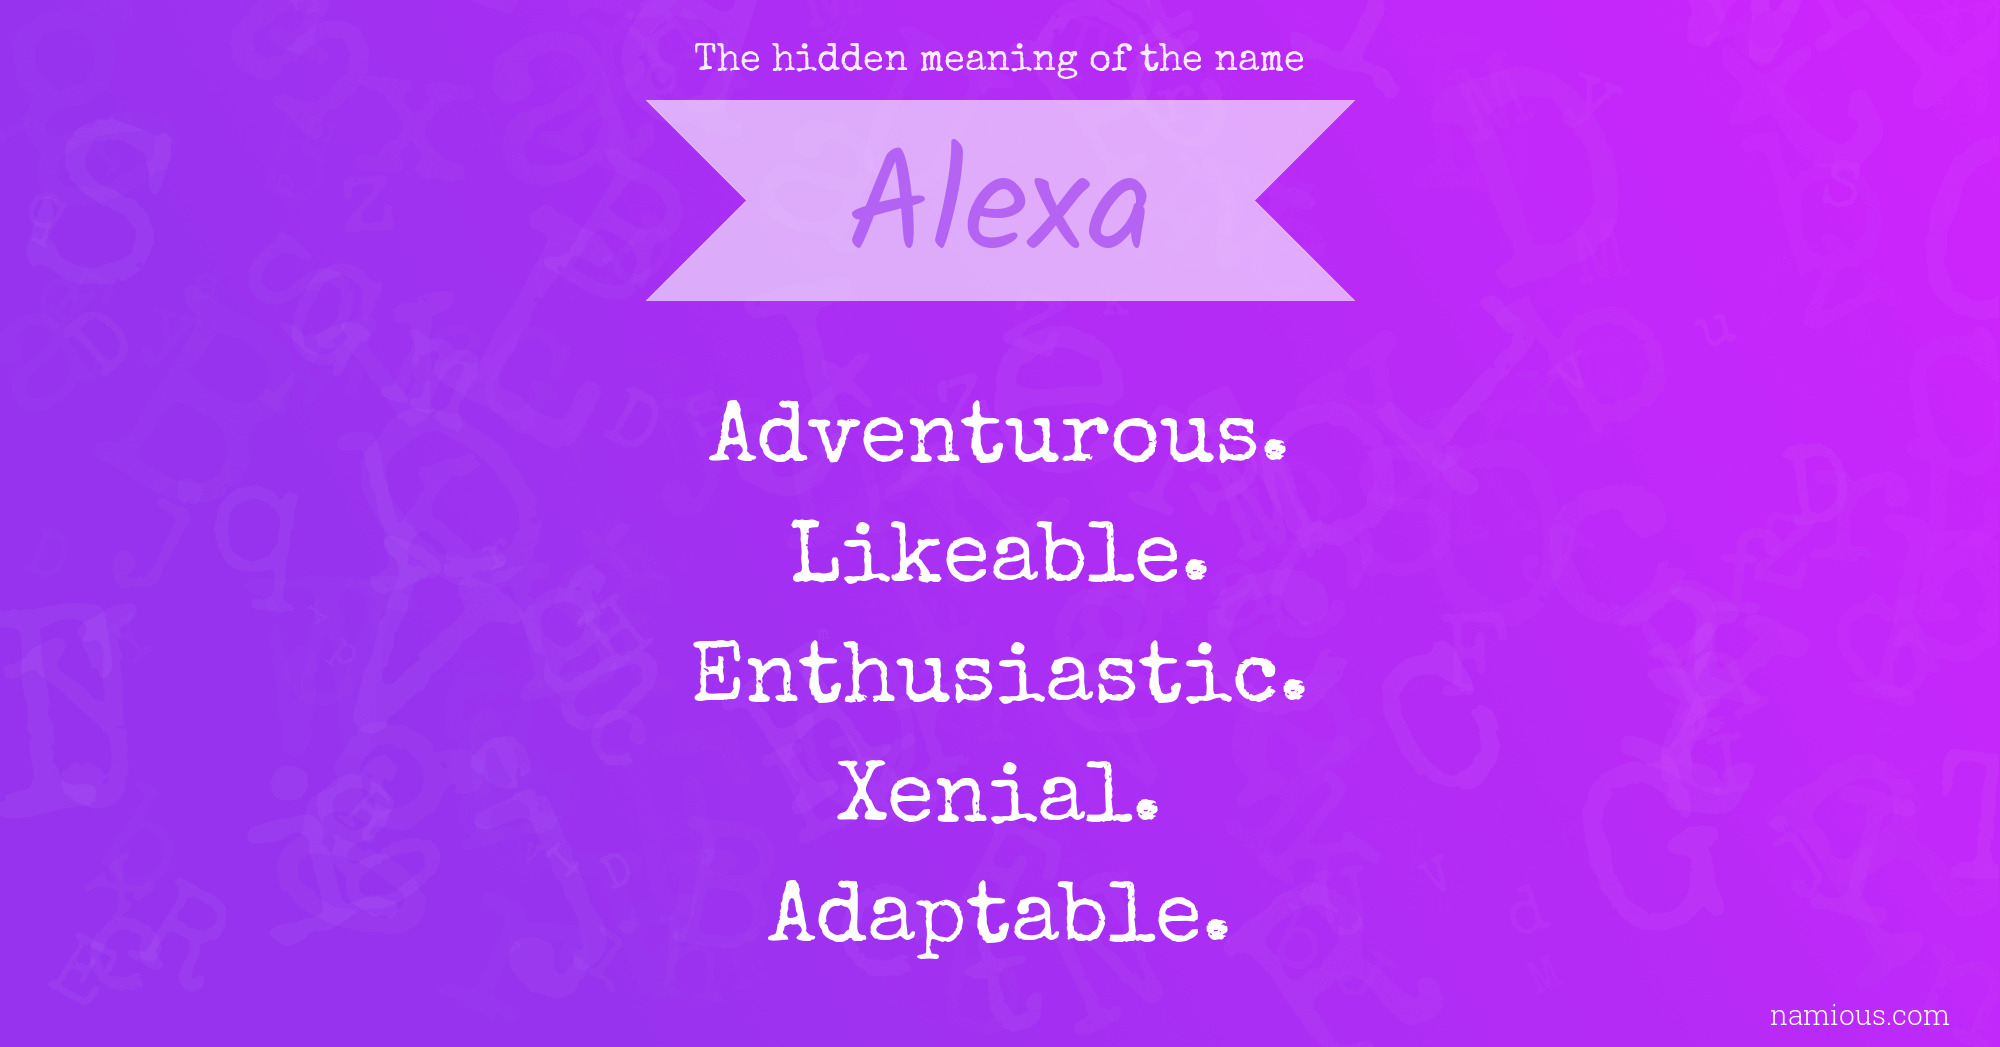 The hidden meaning of the name Alexa